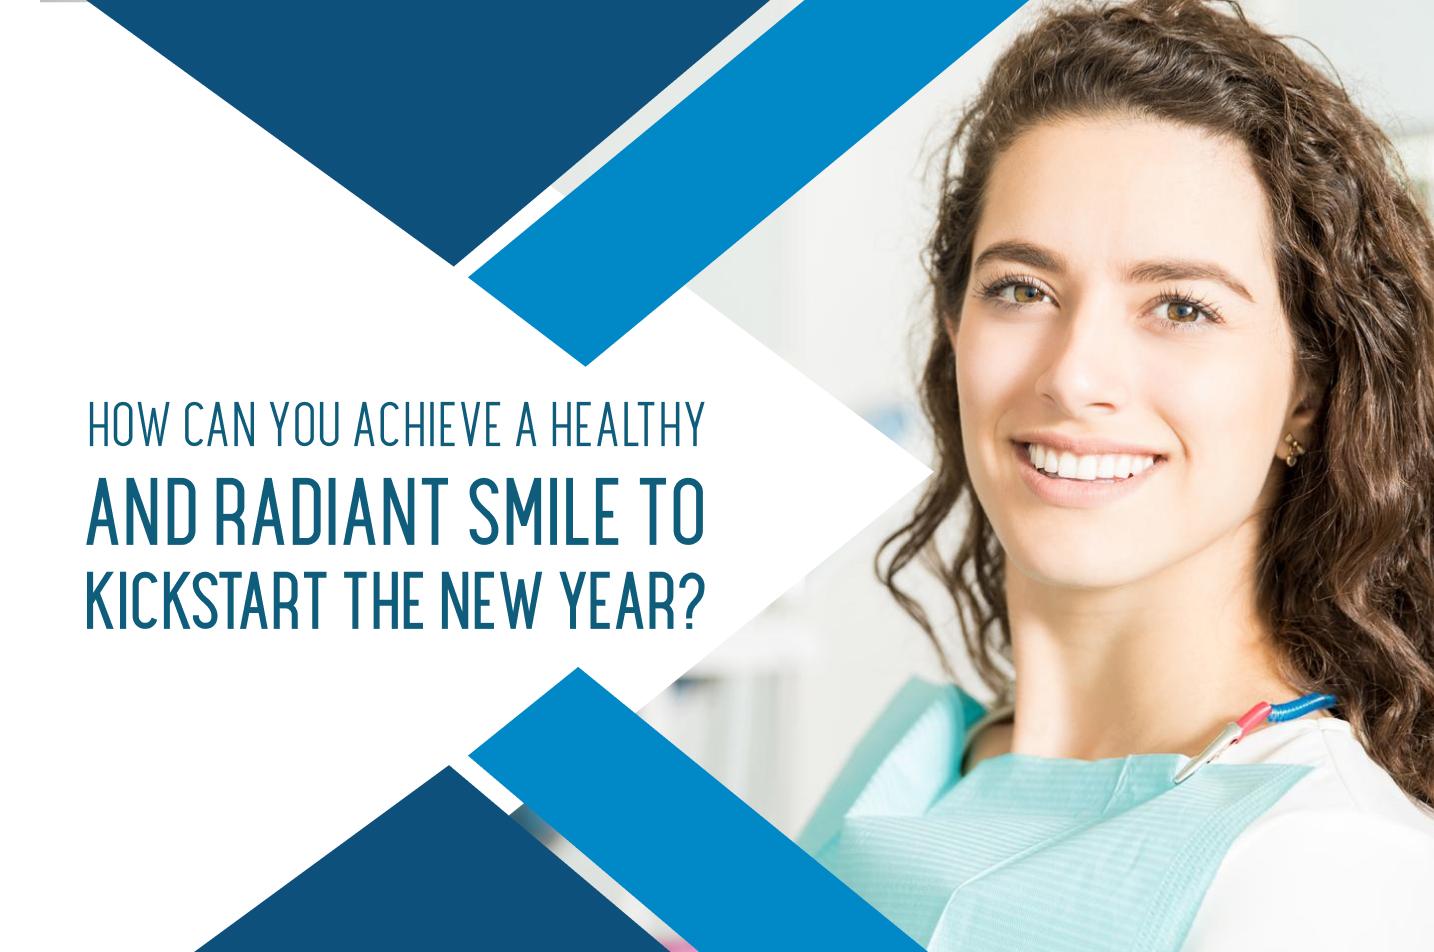 A woman wearing a medical gown and smiling, with accompanying text that appears to be an advertisement or advice on achieving a healthy and radiant smile to start the new year.